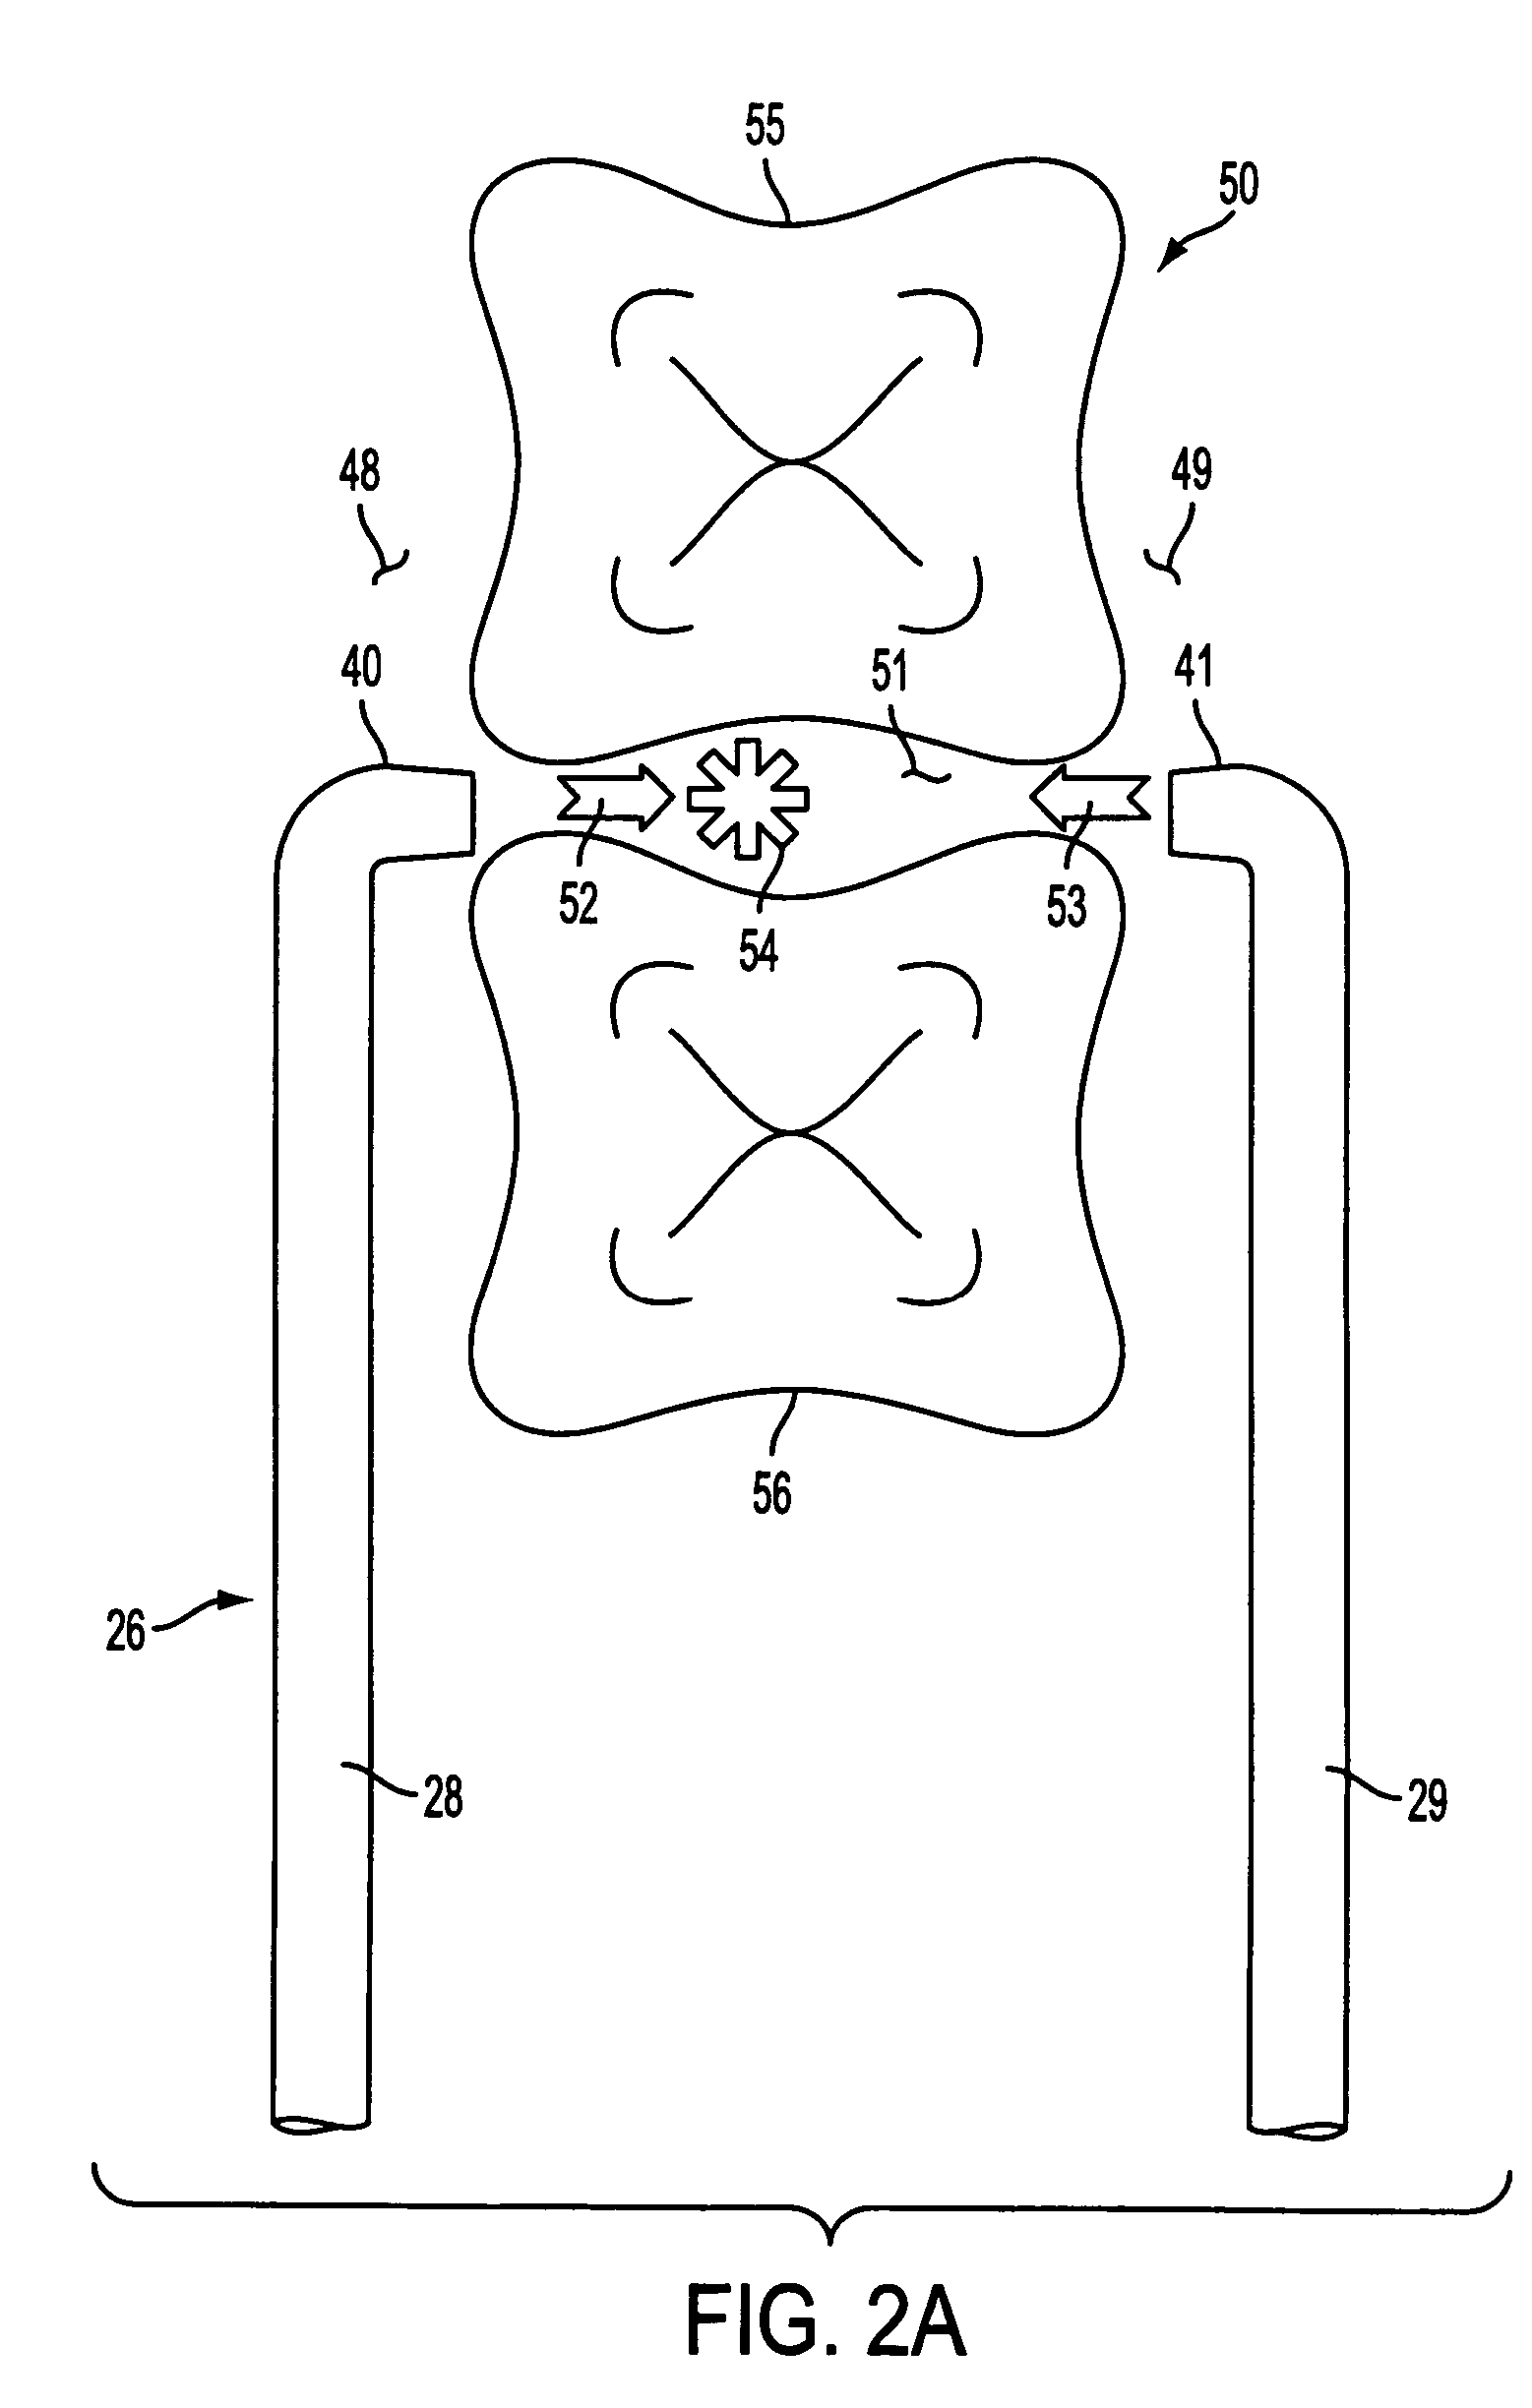 Oral irrigation and/or brushing devices and/or methods